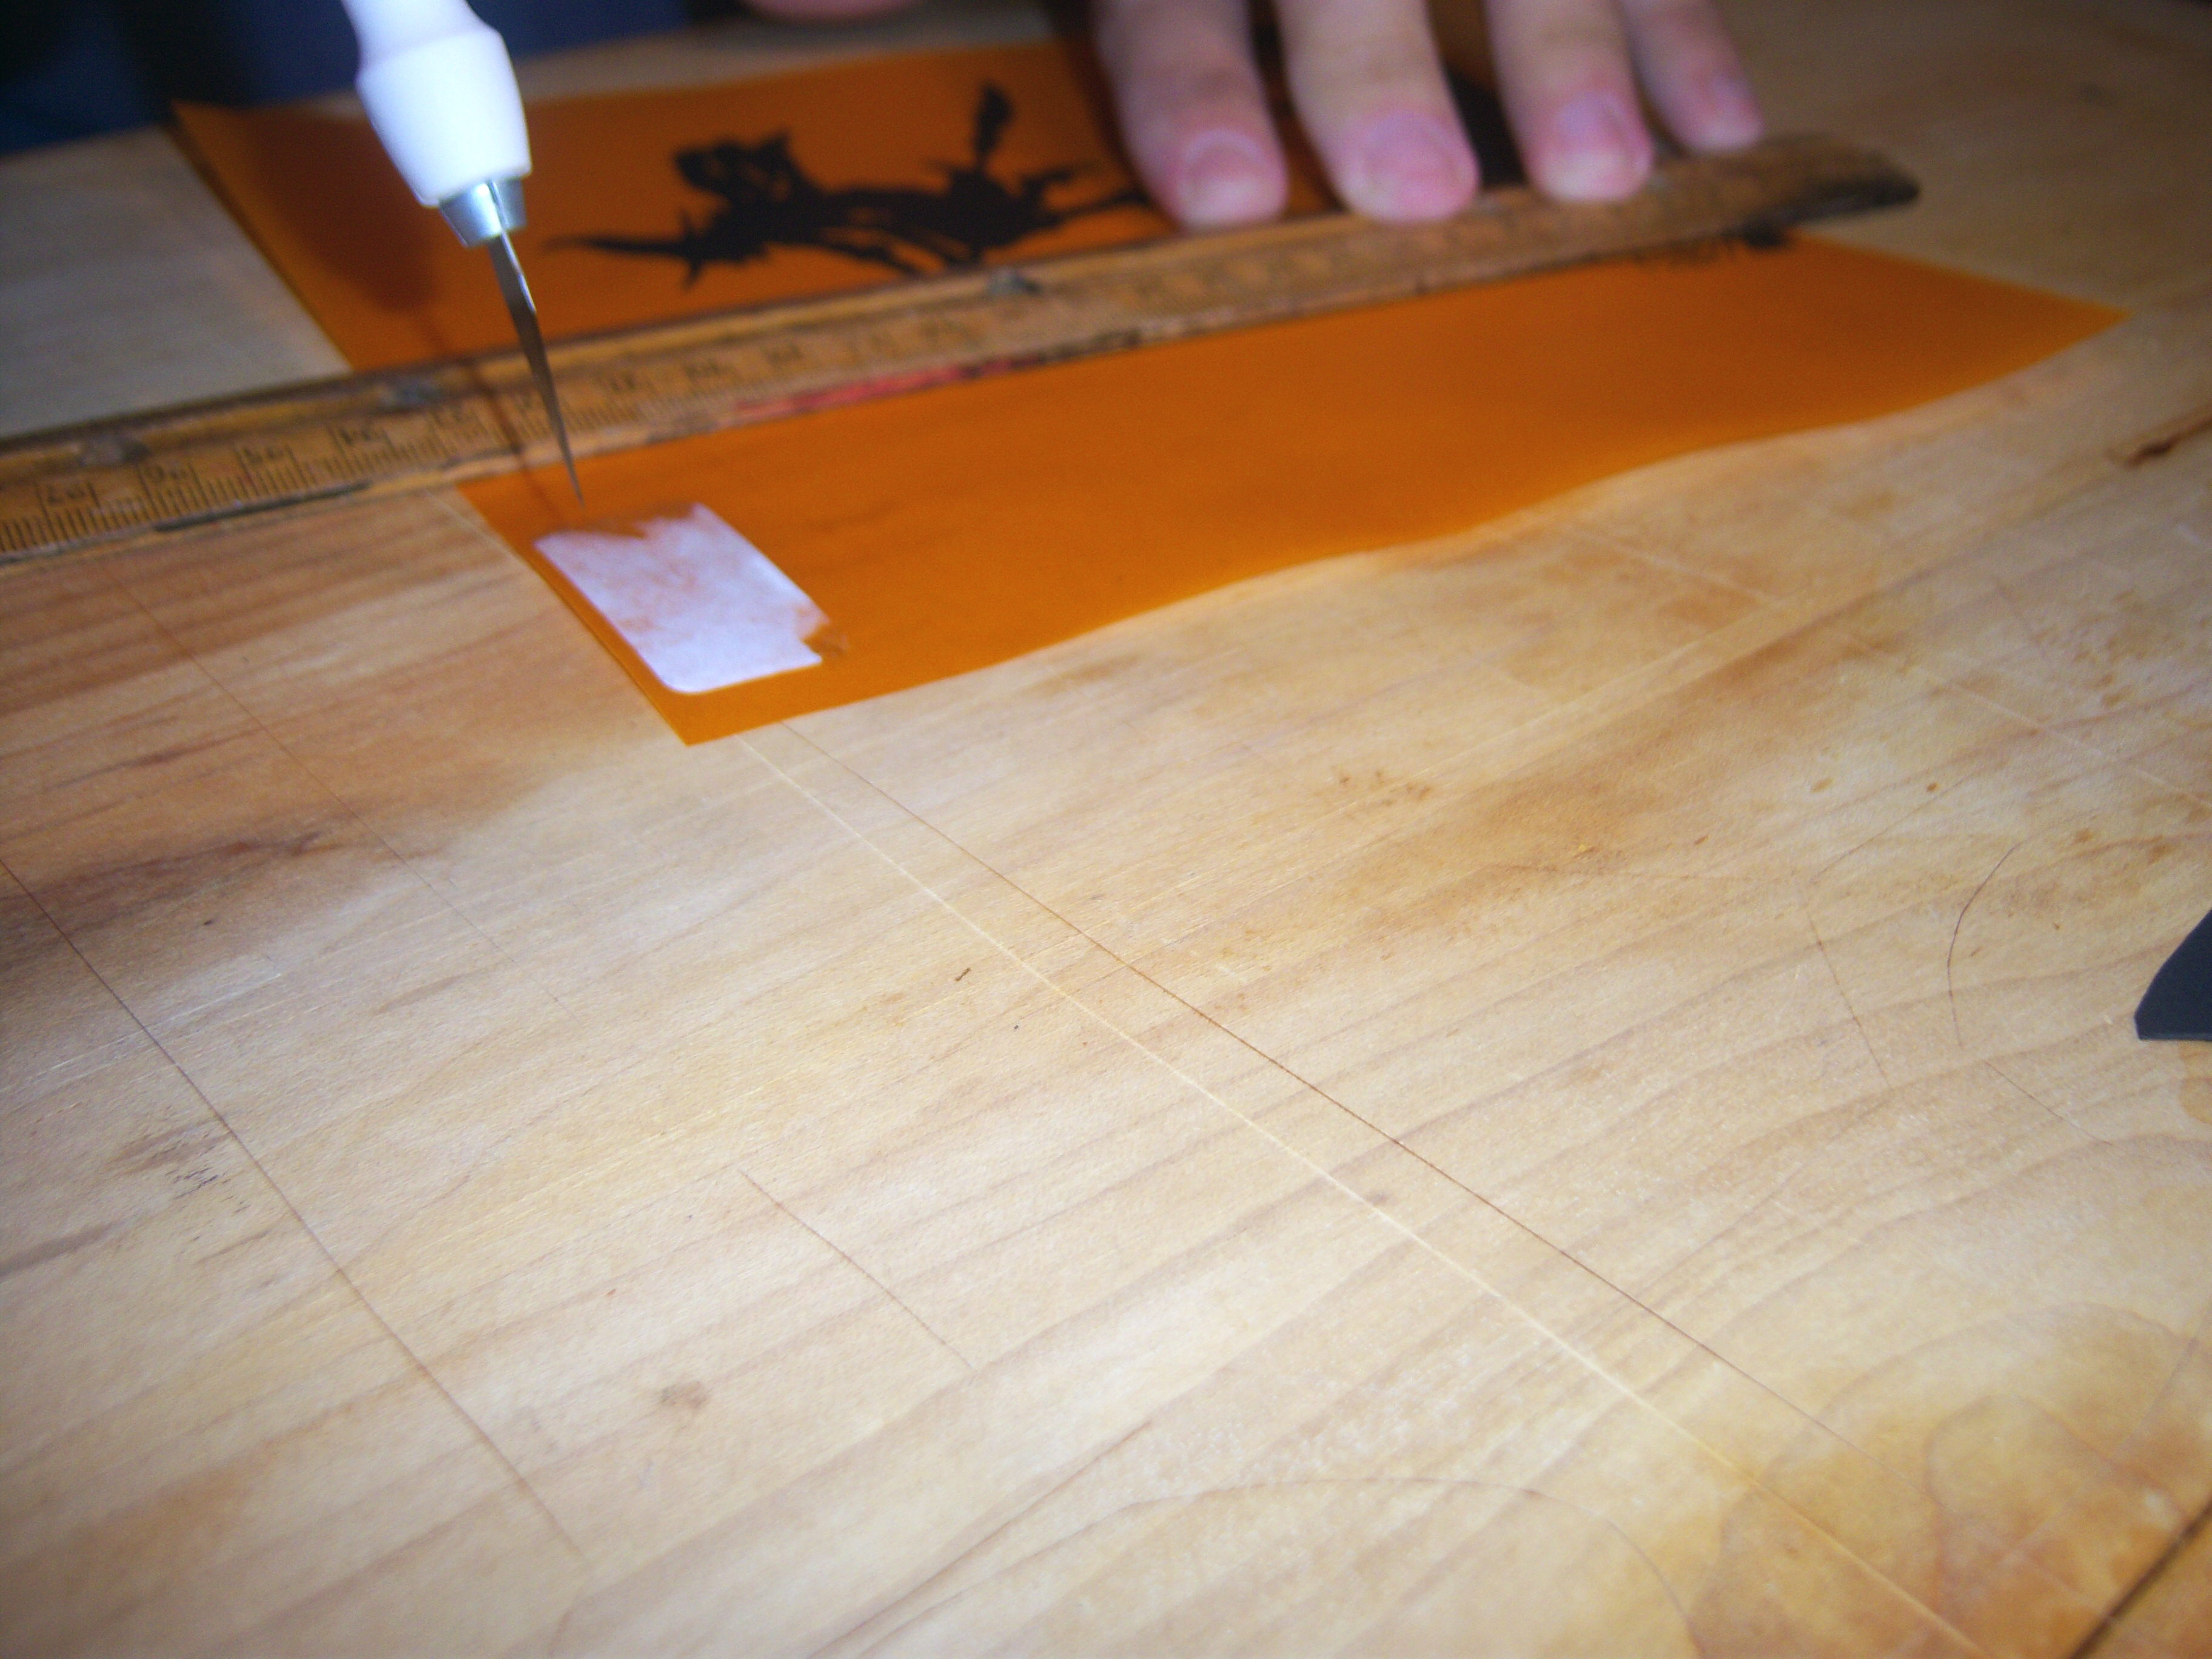 cutting out the vellum (see the price tag!)